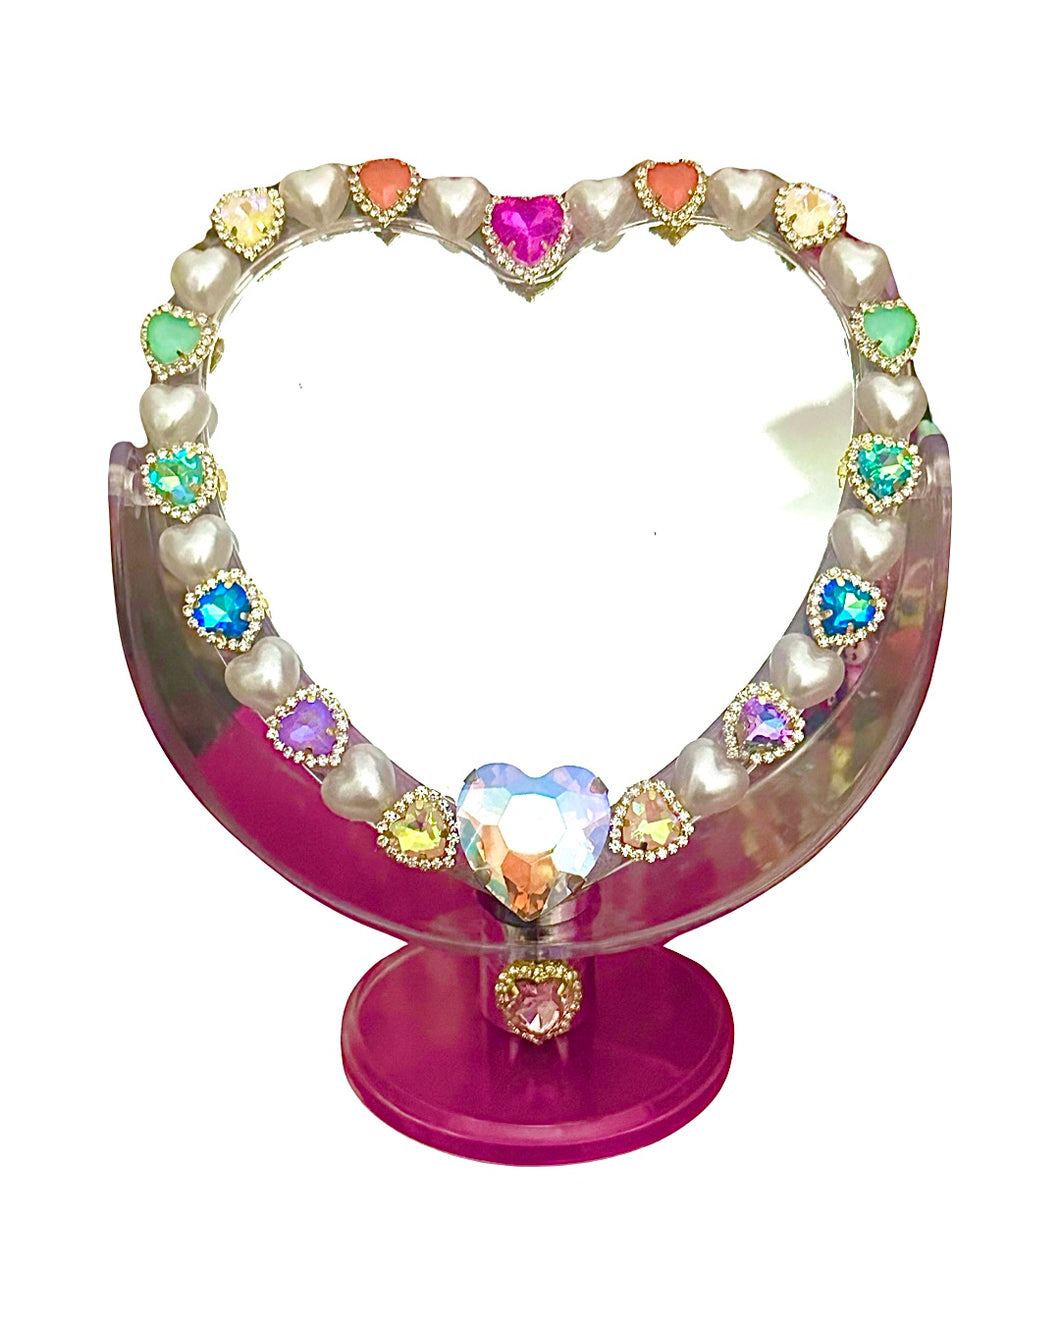 Jeweled Vanity Mirror: One of a Kind